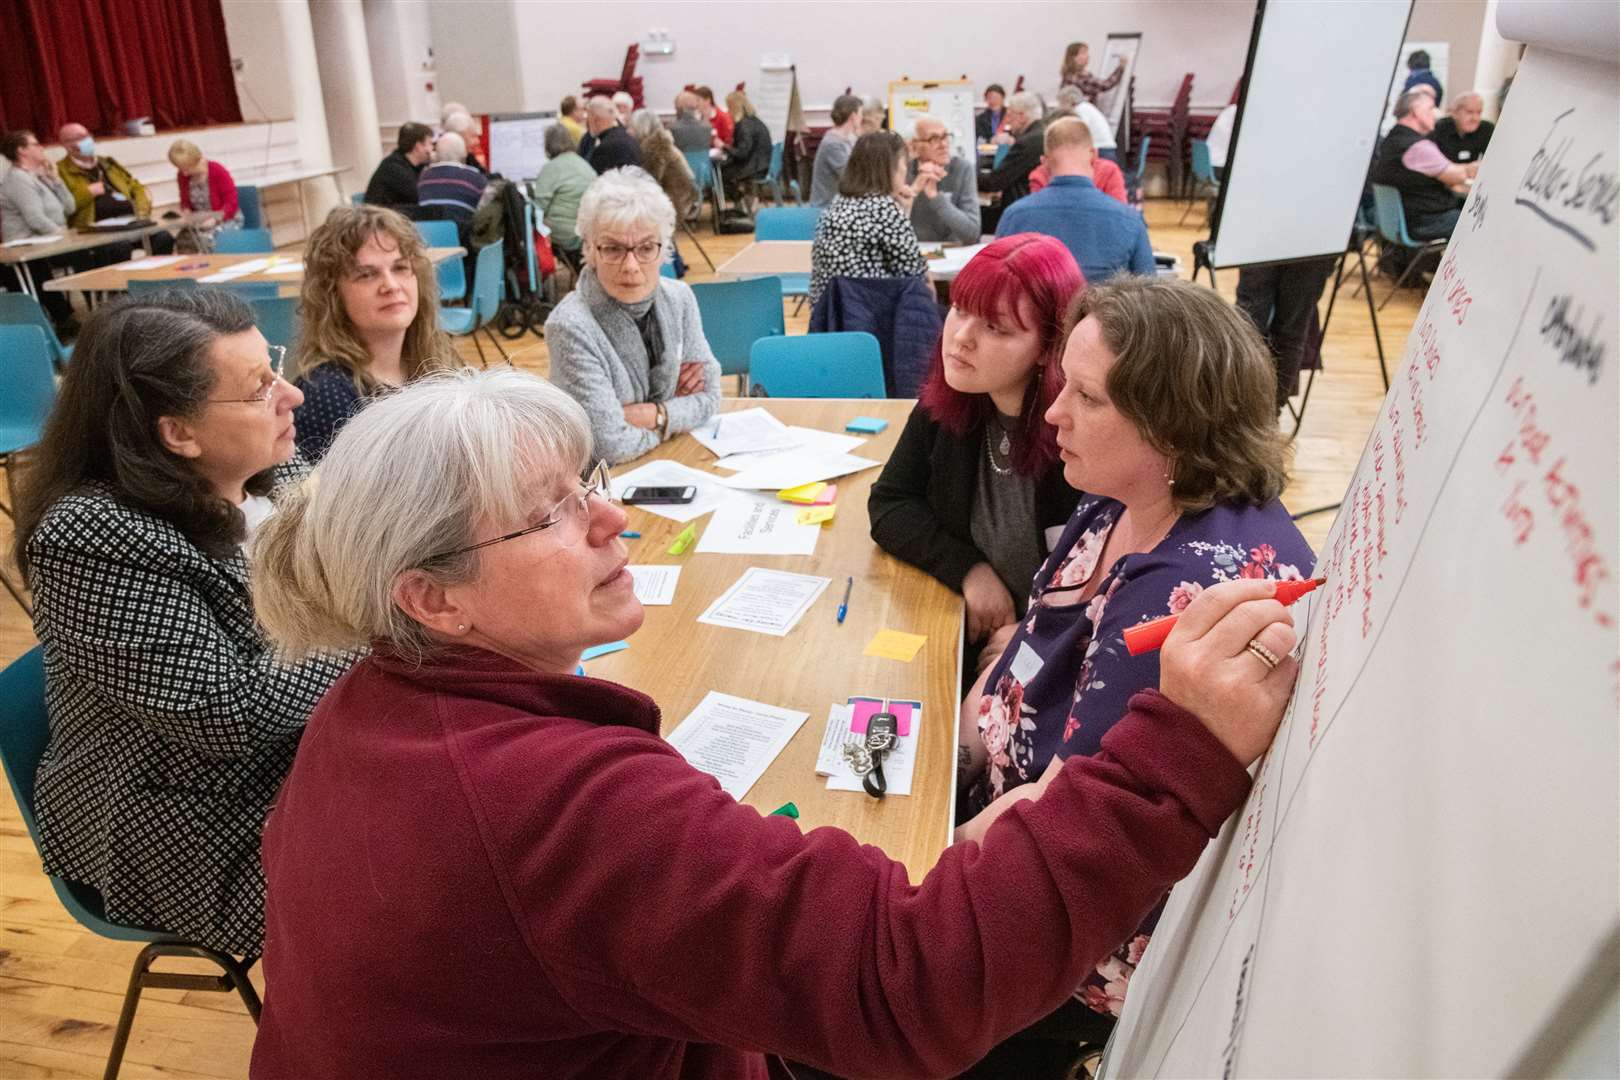 FACT project officer Lorretta Oliphant noting the ideas and suggestions provided by a random group of attendees at the town hall. Picture: Daniel Forsyth